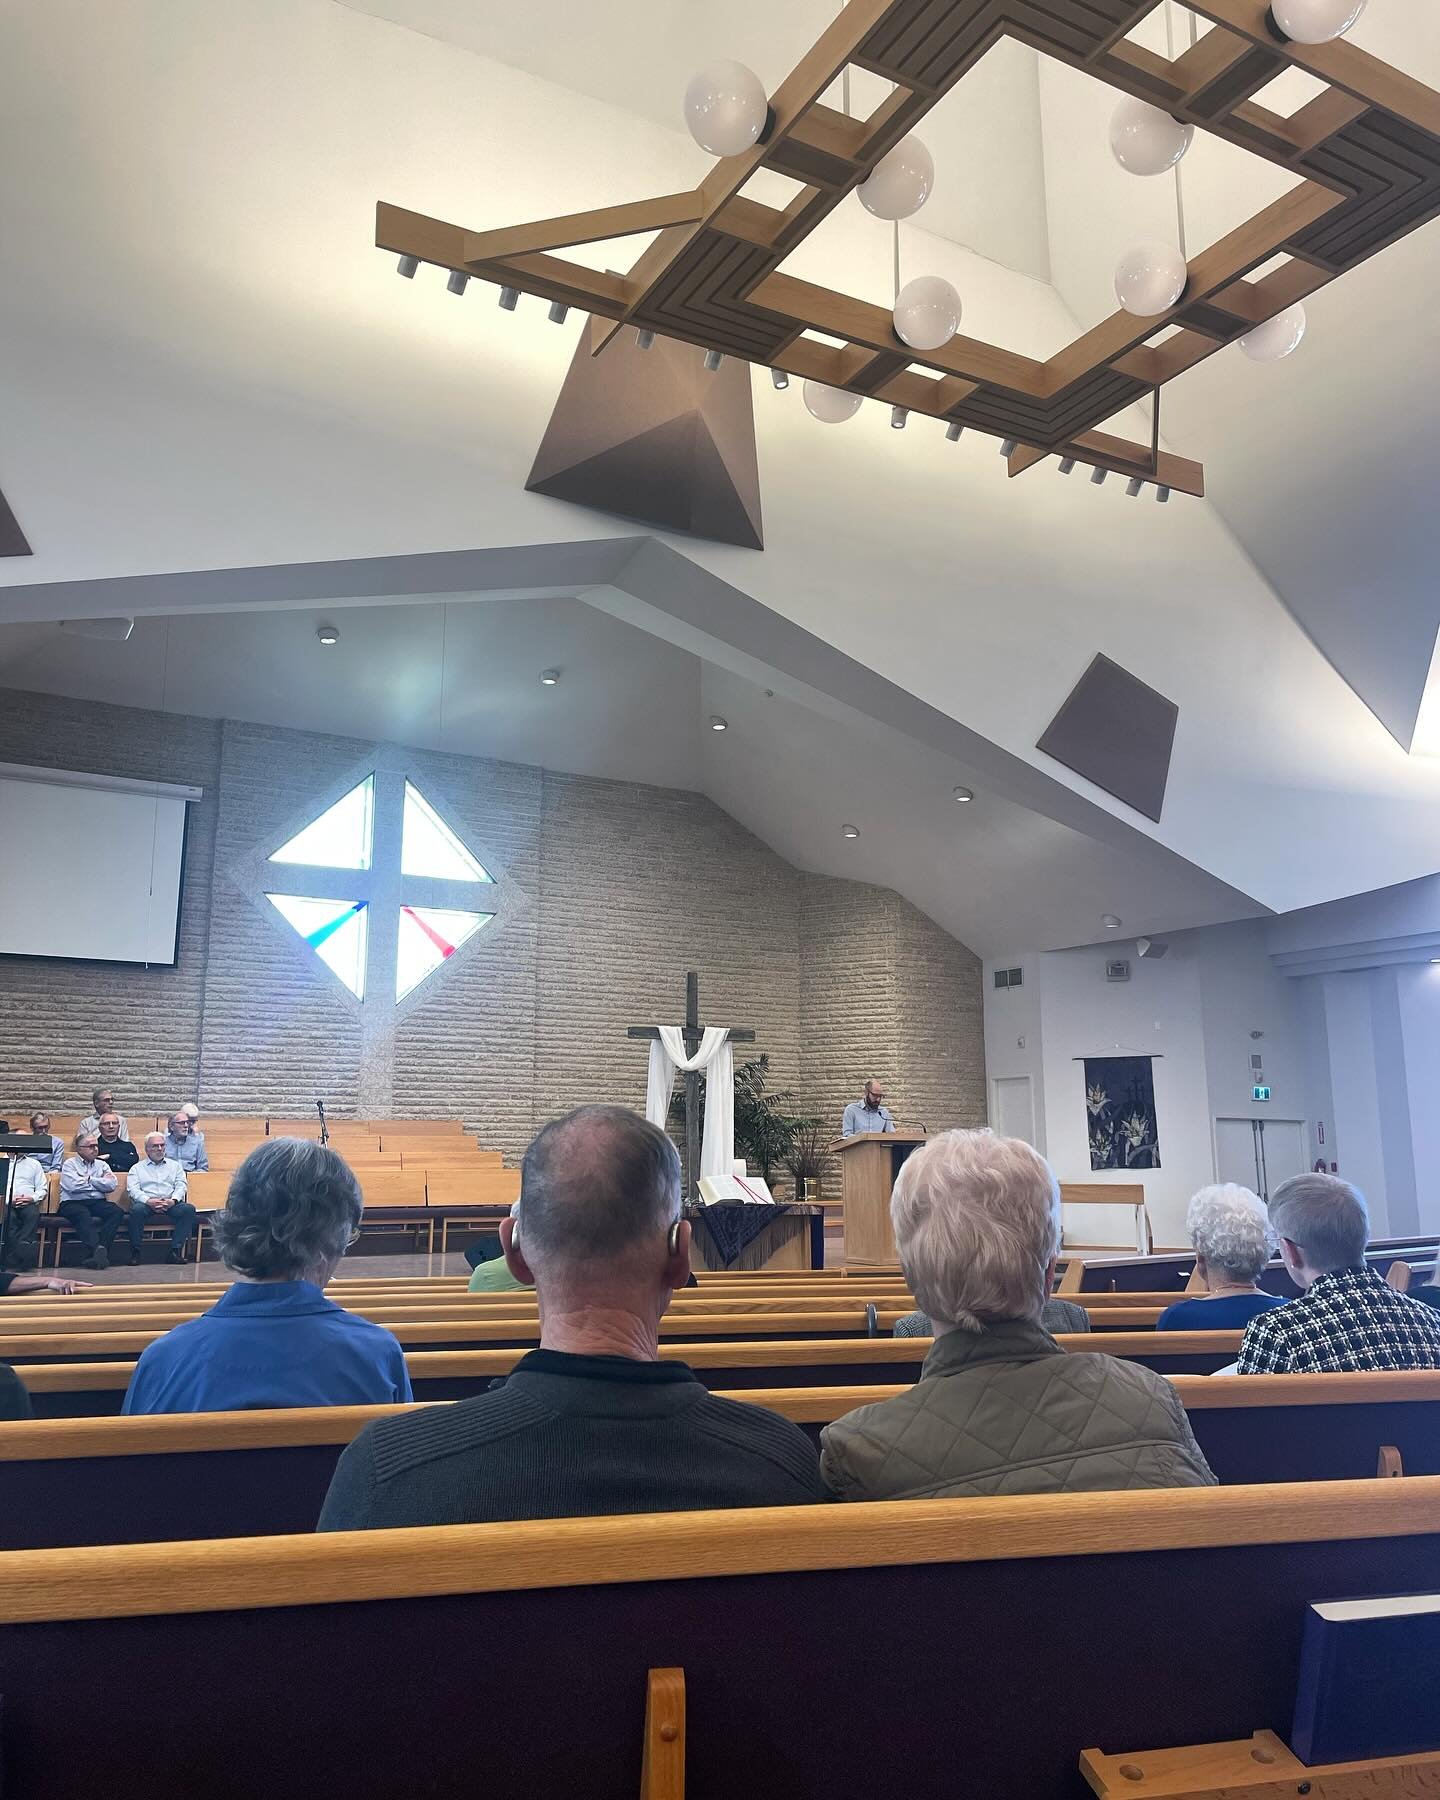 May 5 &ndash; Worship Focus
Theme: I Am&hellip;The Way, the Truth and the Life
Scripture: John 14:1-7, Isaiah 40:1-5
Speaker: Kevin Derksen

Our post-Easter worship explores several of the &ldquo;I am&hellip;&rdquo; statements that Jesus uses to desc